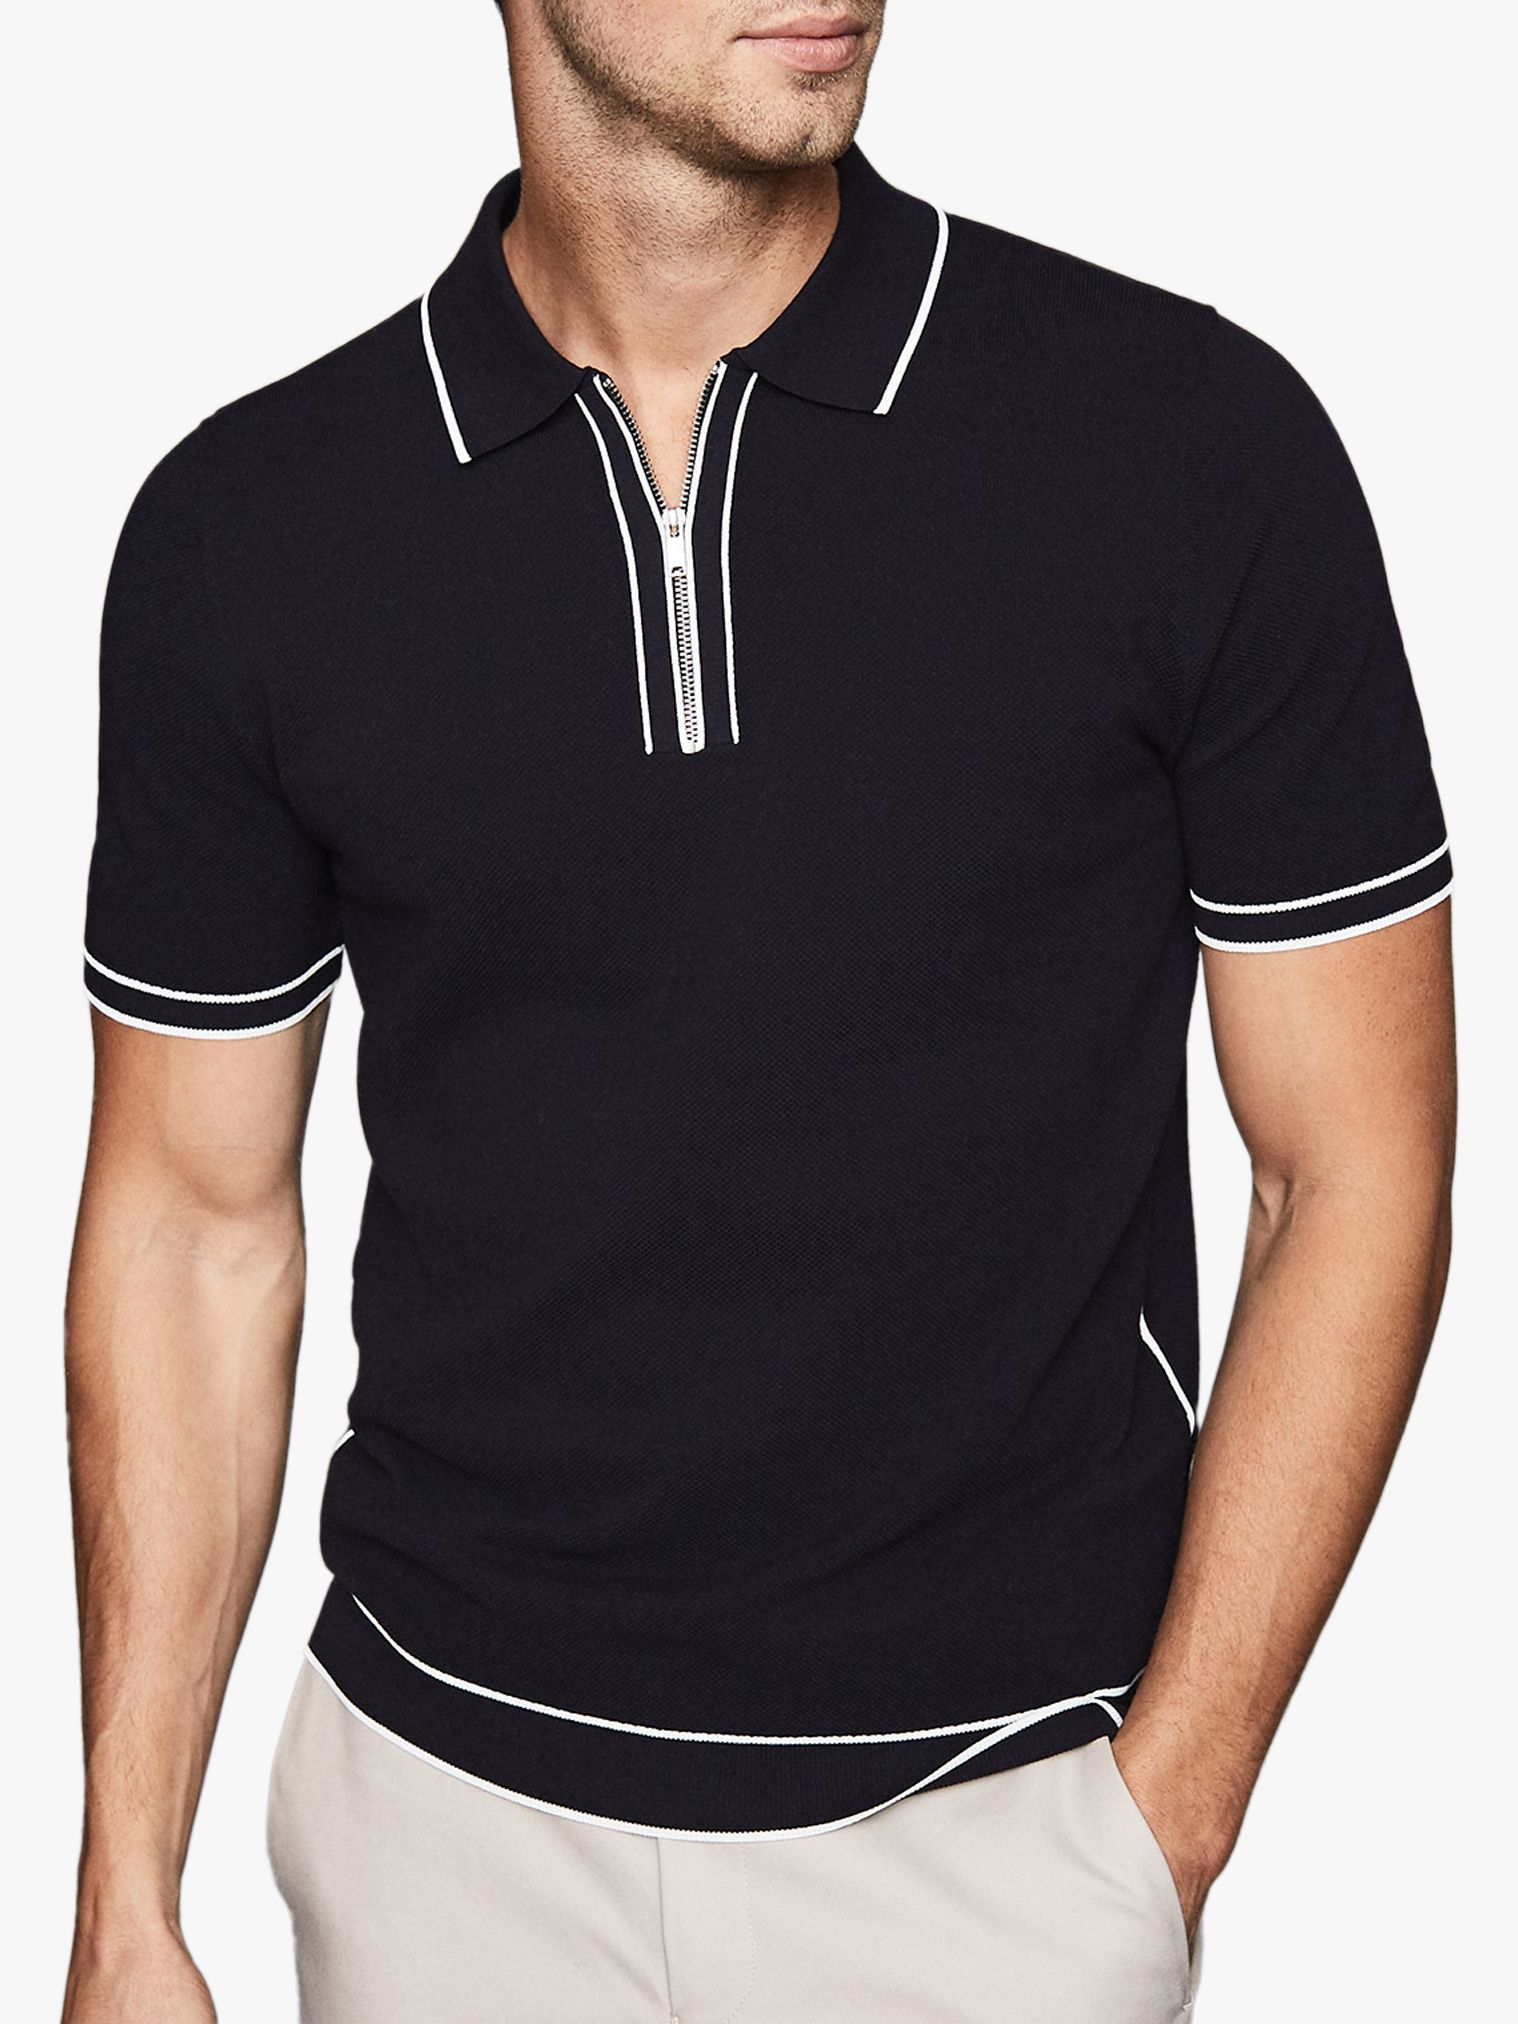 Reiss Lyle Tipped Zip Neck Polo Shirt at John Lewis & Partners